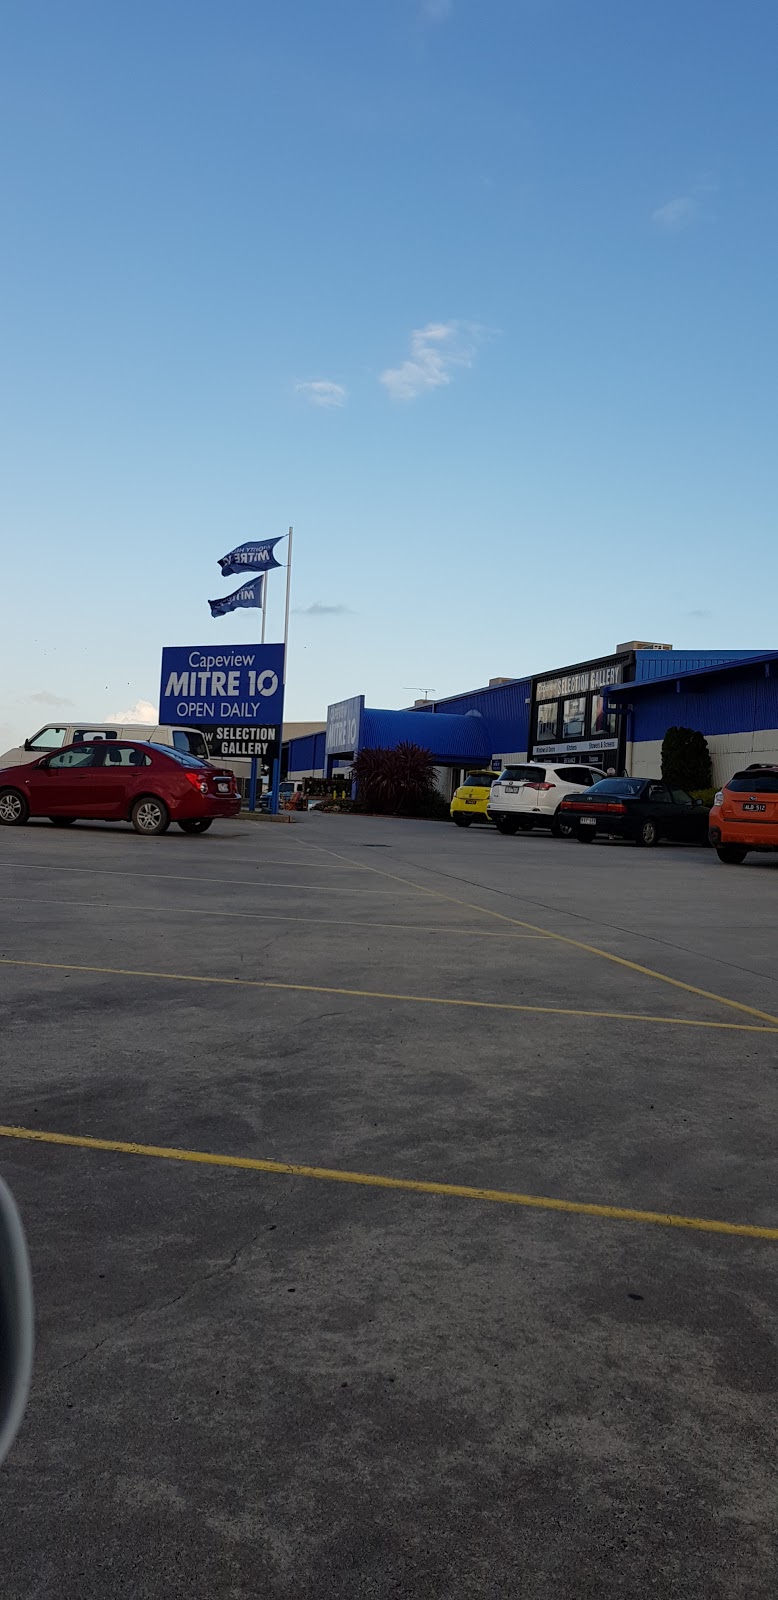 Capeview Mitre 10 | hardware store | 2 Cusack Rd, Leongatha VIC 3953, Australia | 0356625666 OR +61 3 5662 5666